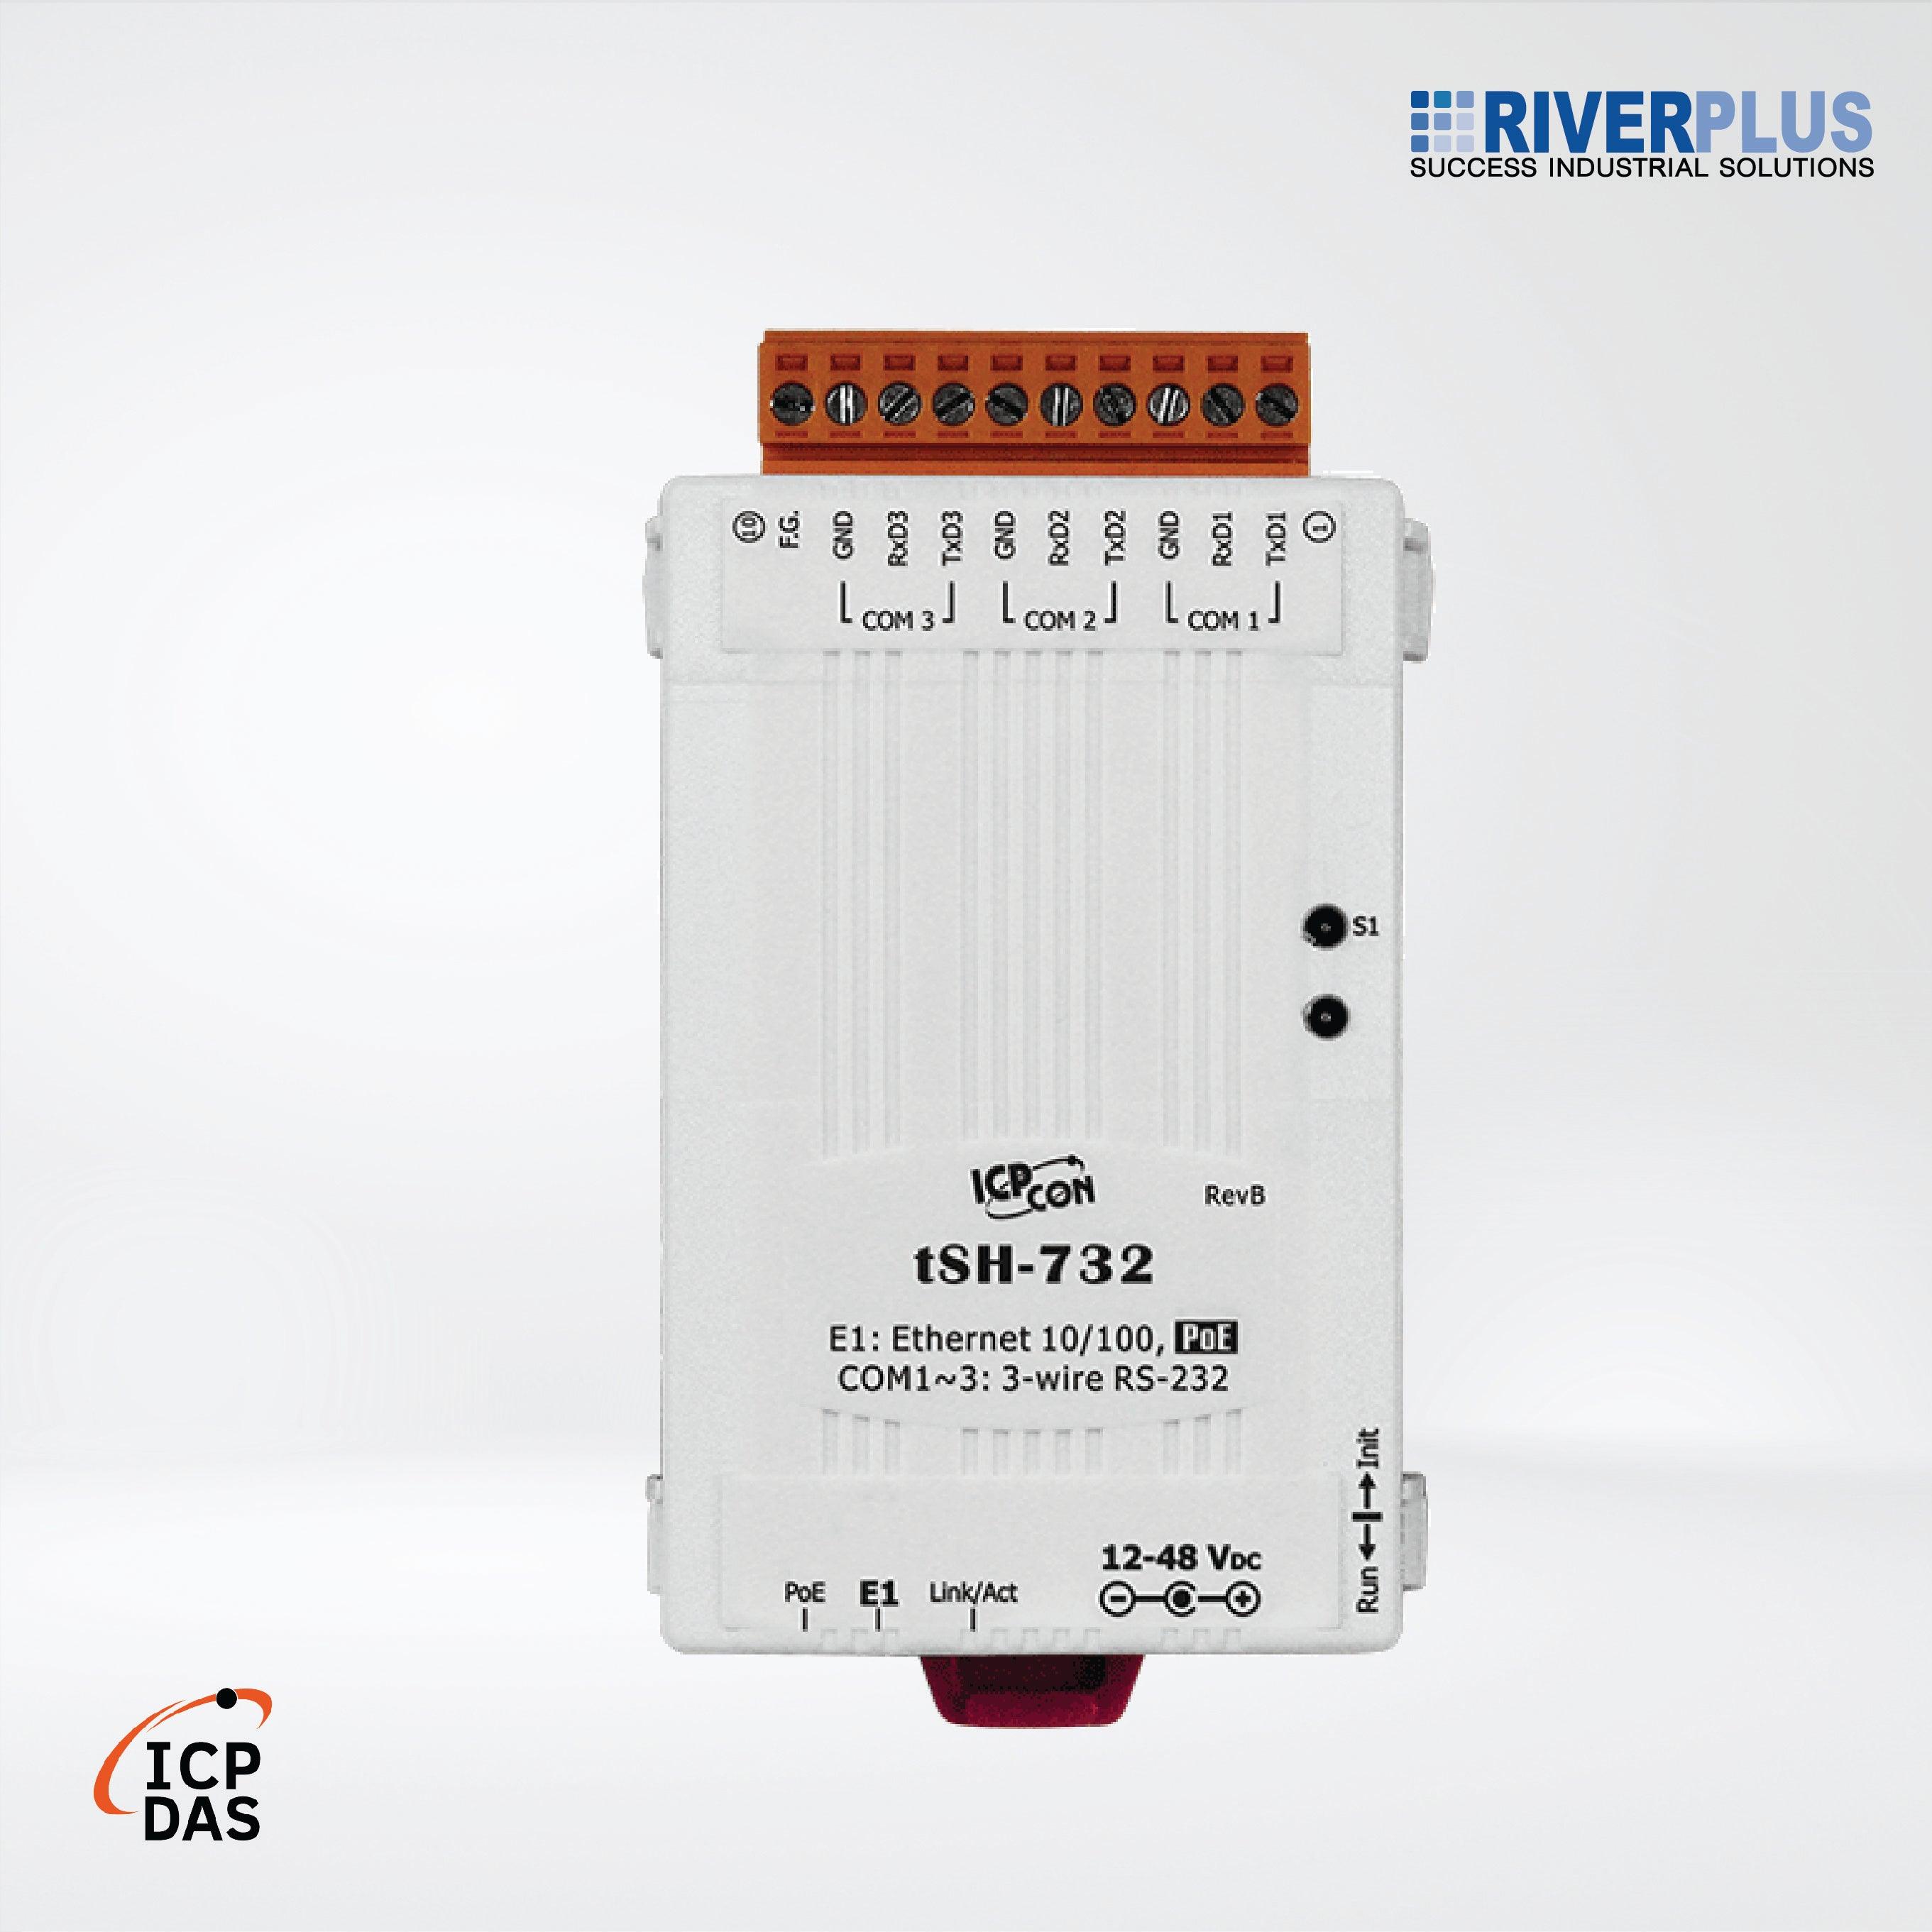 tSH-732 Tiny (3x RS-232) Serial Port Sharer with PoE - Riverplus